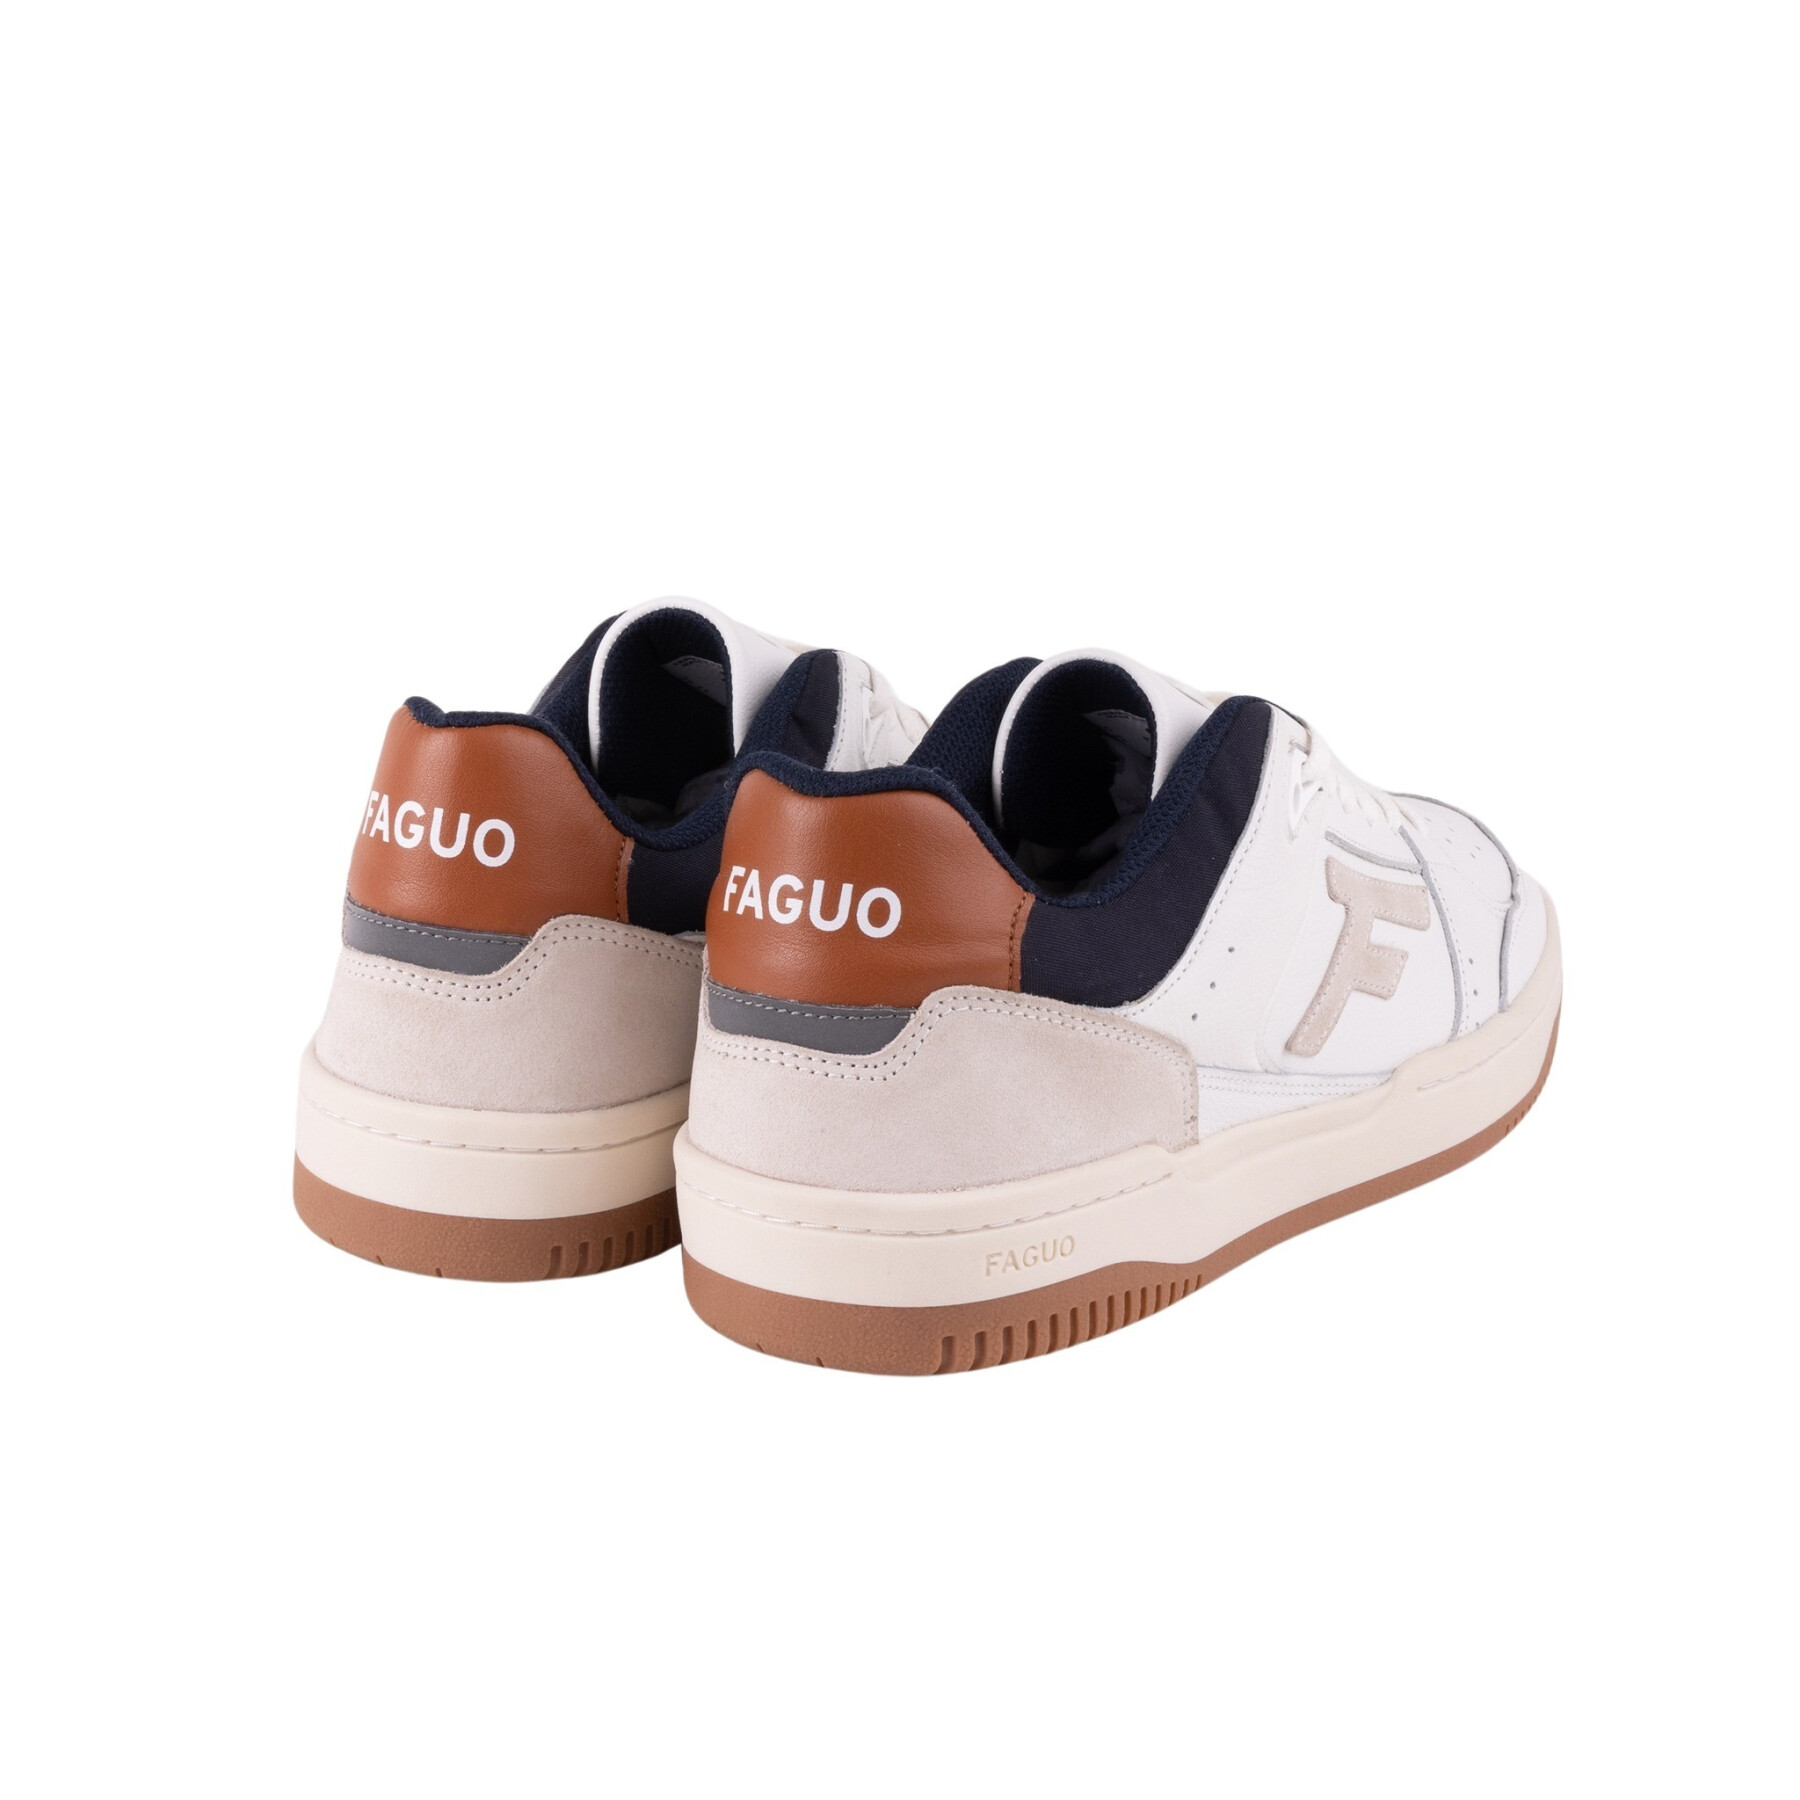 Leather and suede sneakers Faguo Urban 1